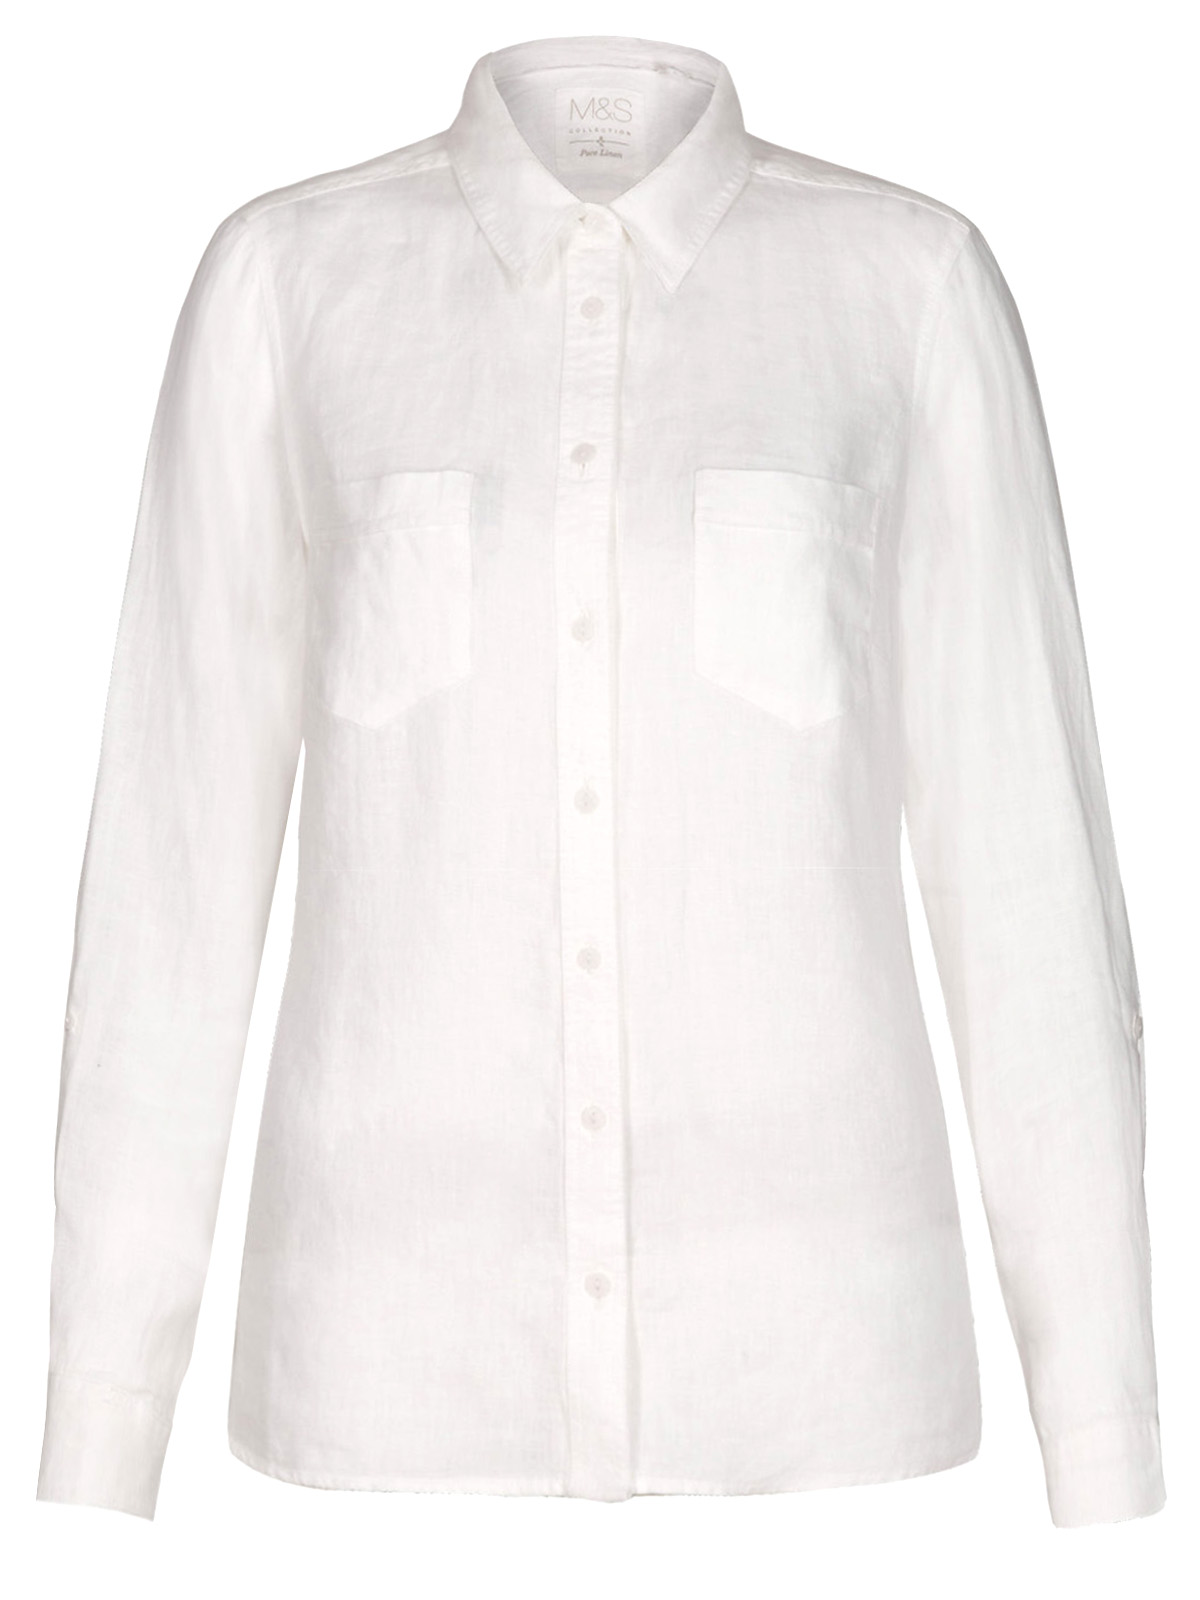 Marks and Spencer - - M&5 WHITE Pure Linen Long Sleeve Shirt - Size 8 to 18